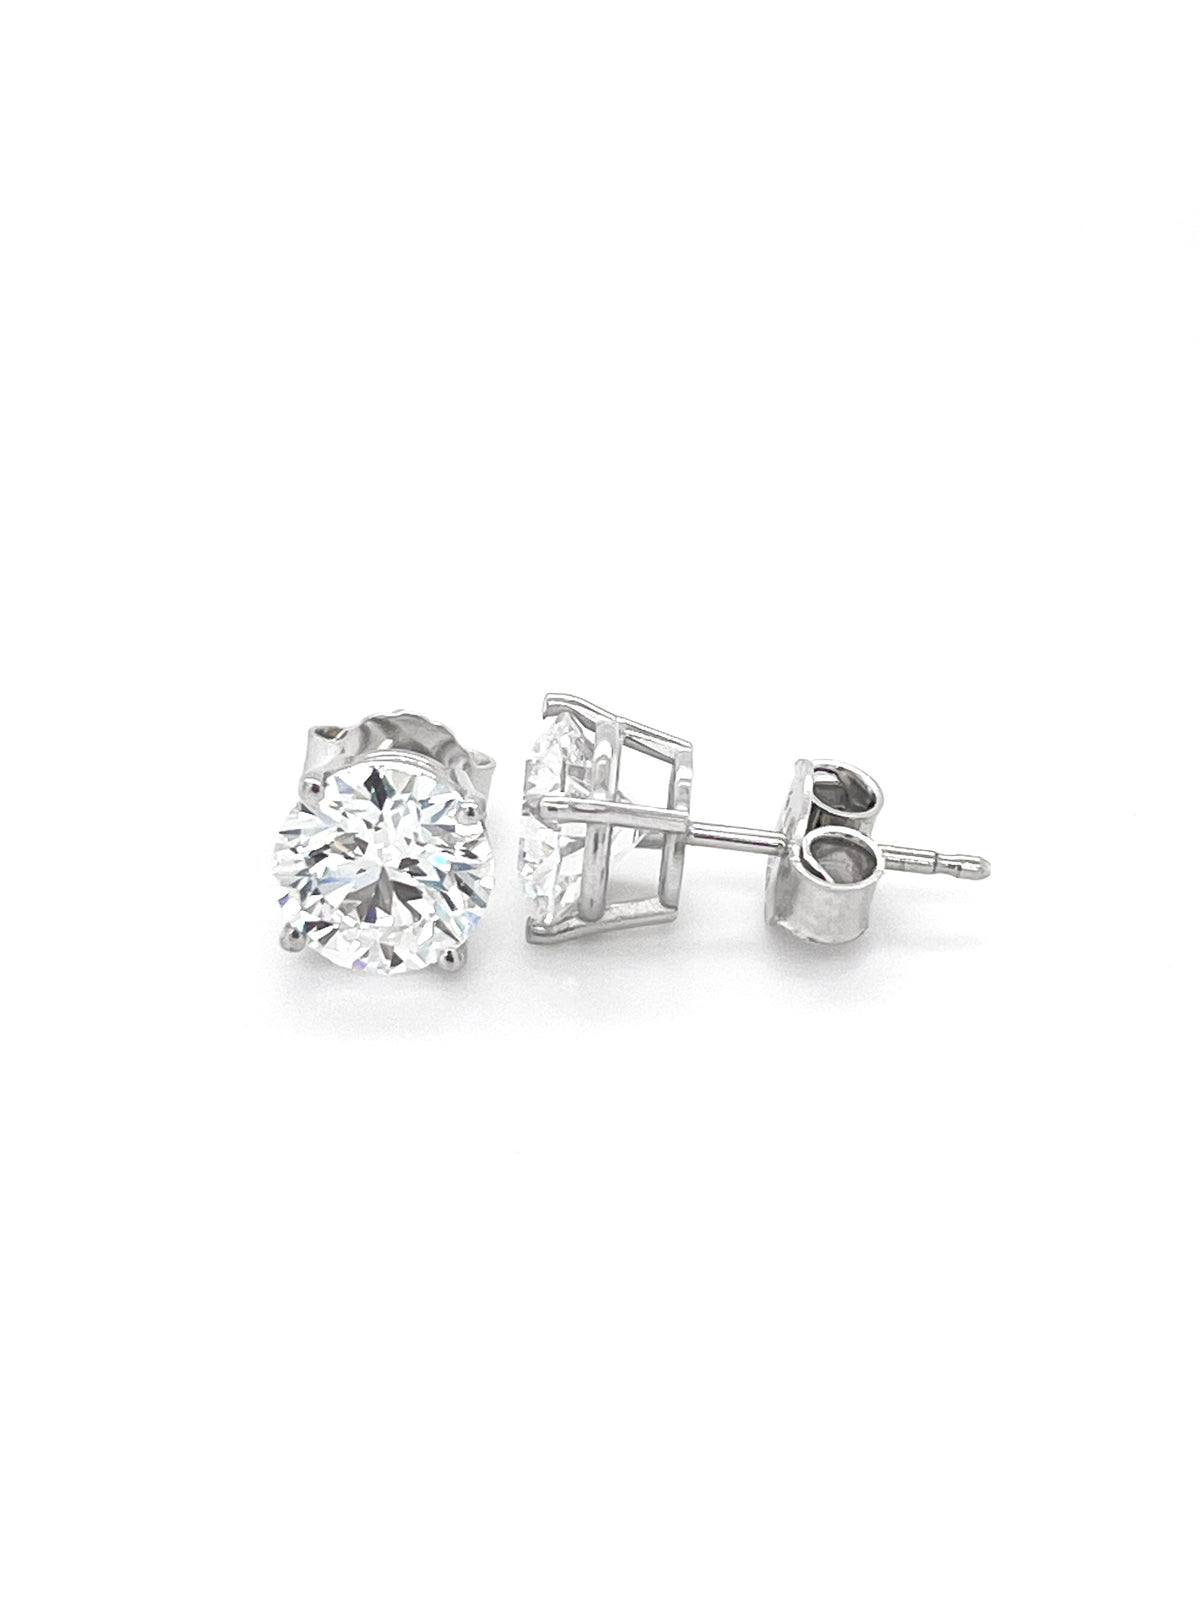 2.18CT Lab Grown Diamond Solitaire Stud Earrings in 14K White Gold